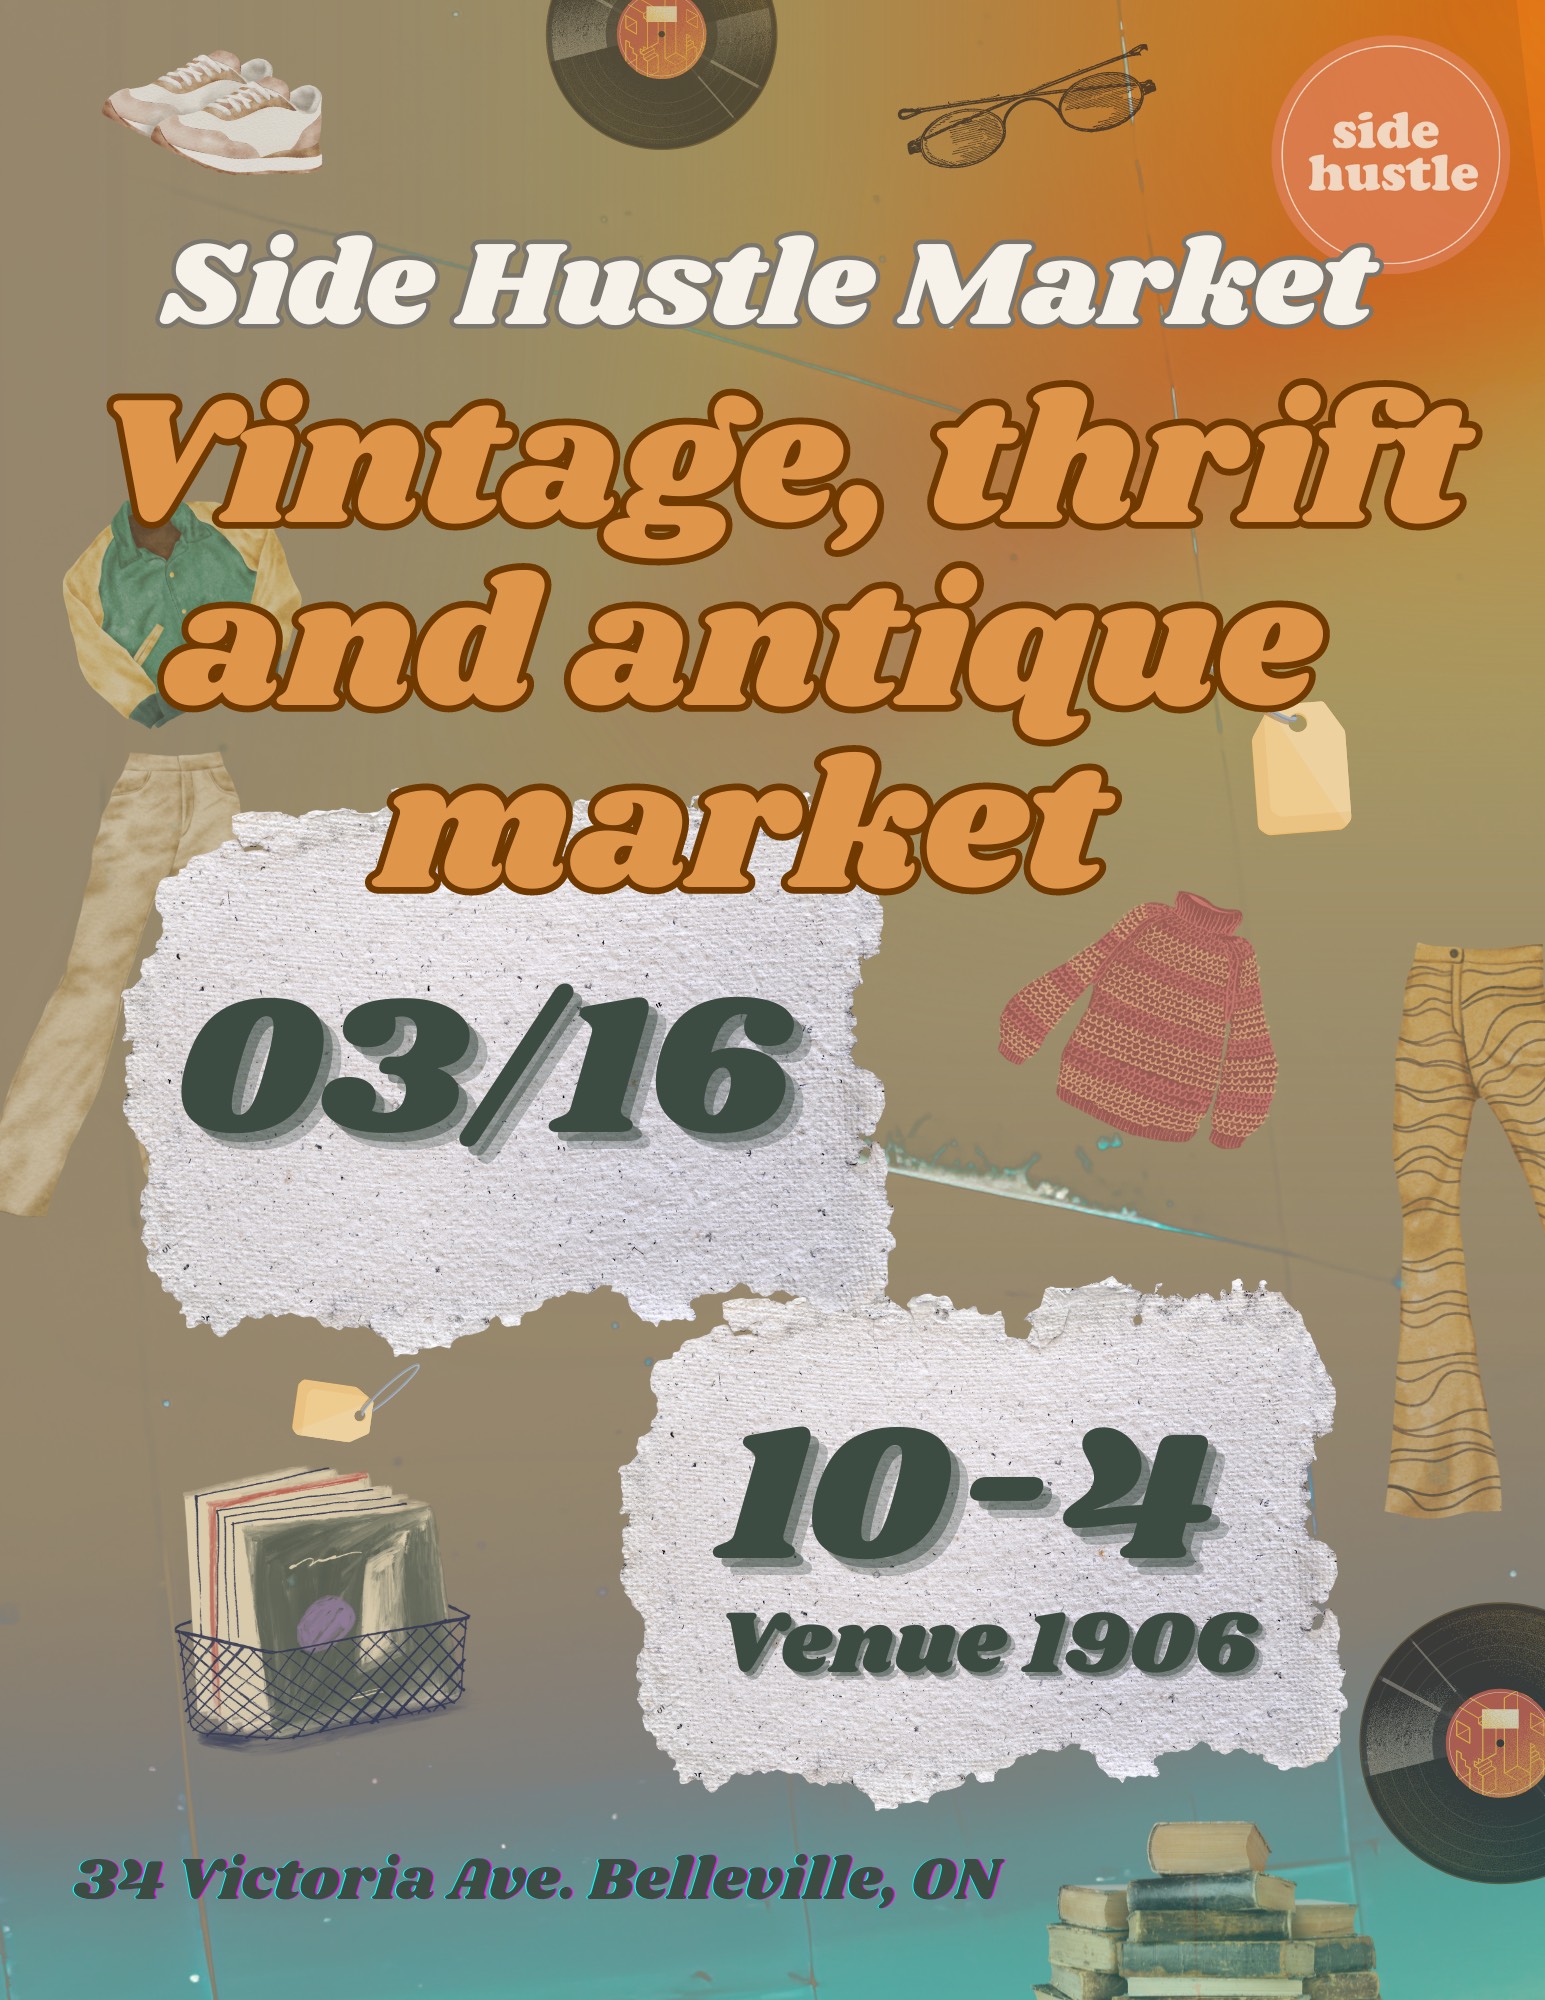 Poster for the event titled "Vintage Thrift and Antique Market"